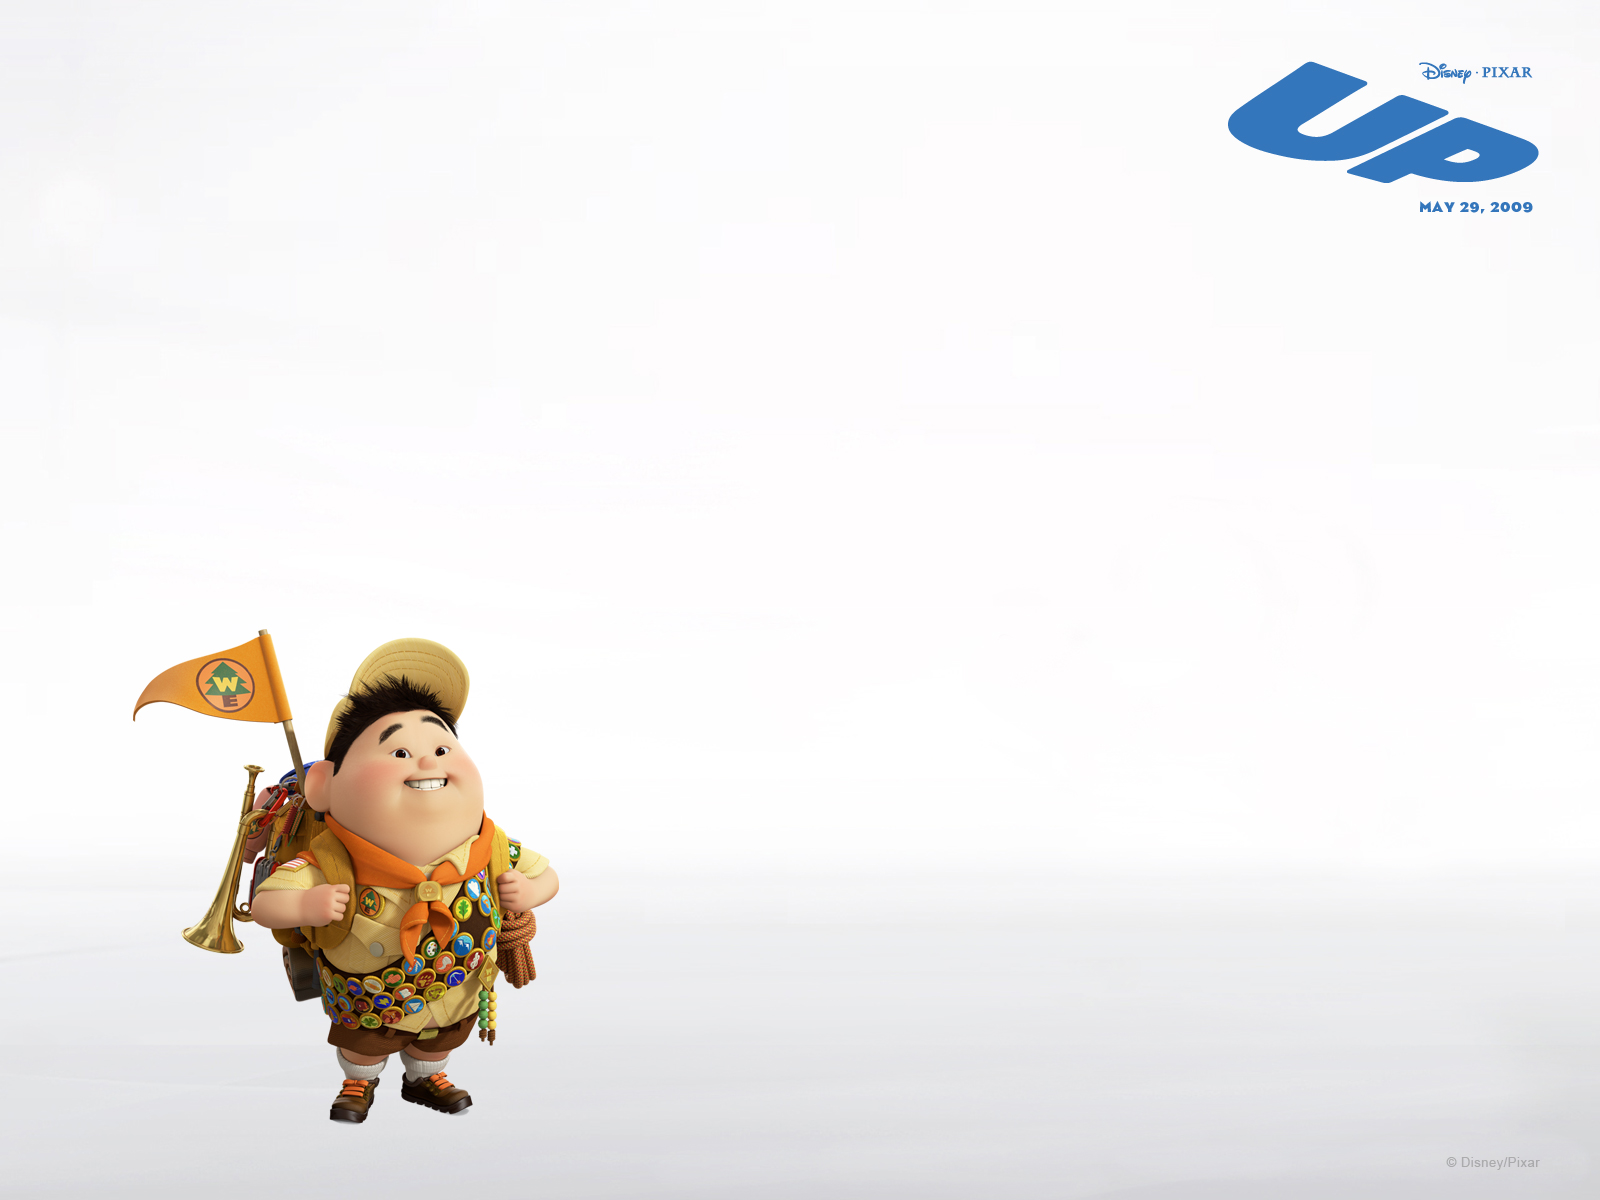 pixar, russell (up), movie, up, disney, up (movie) wallpaper for mobile